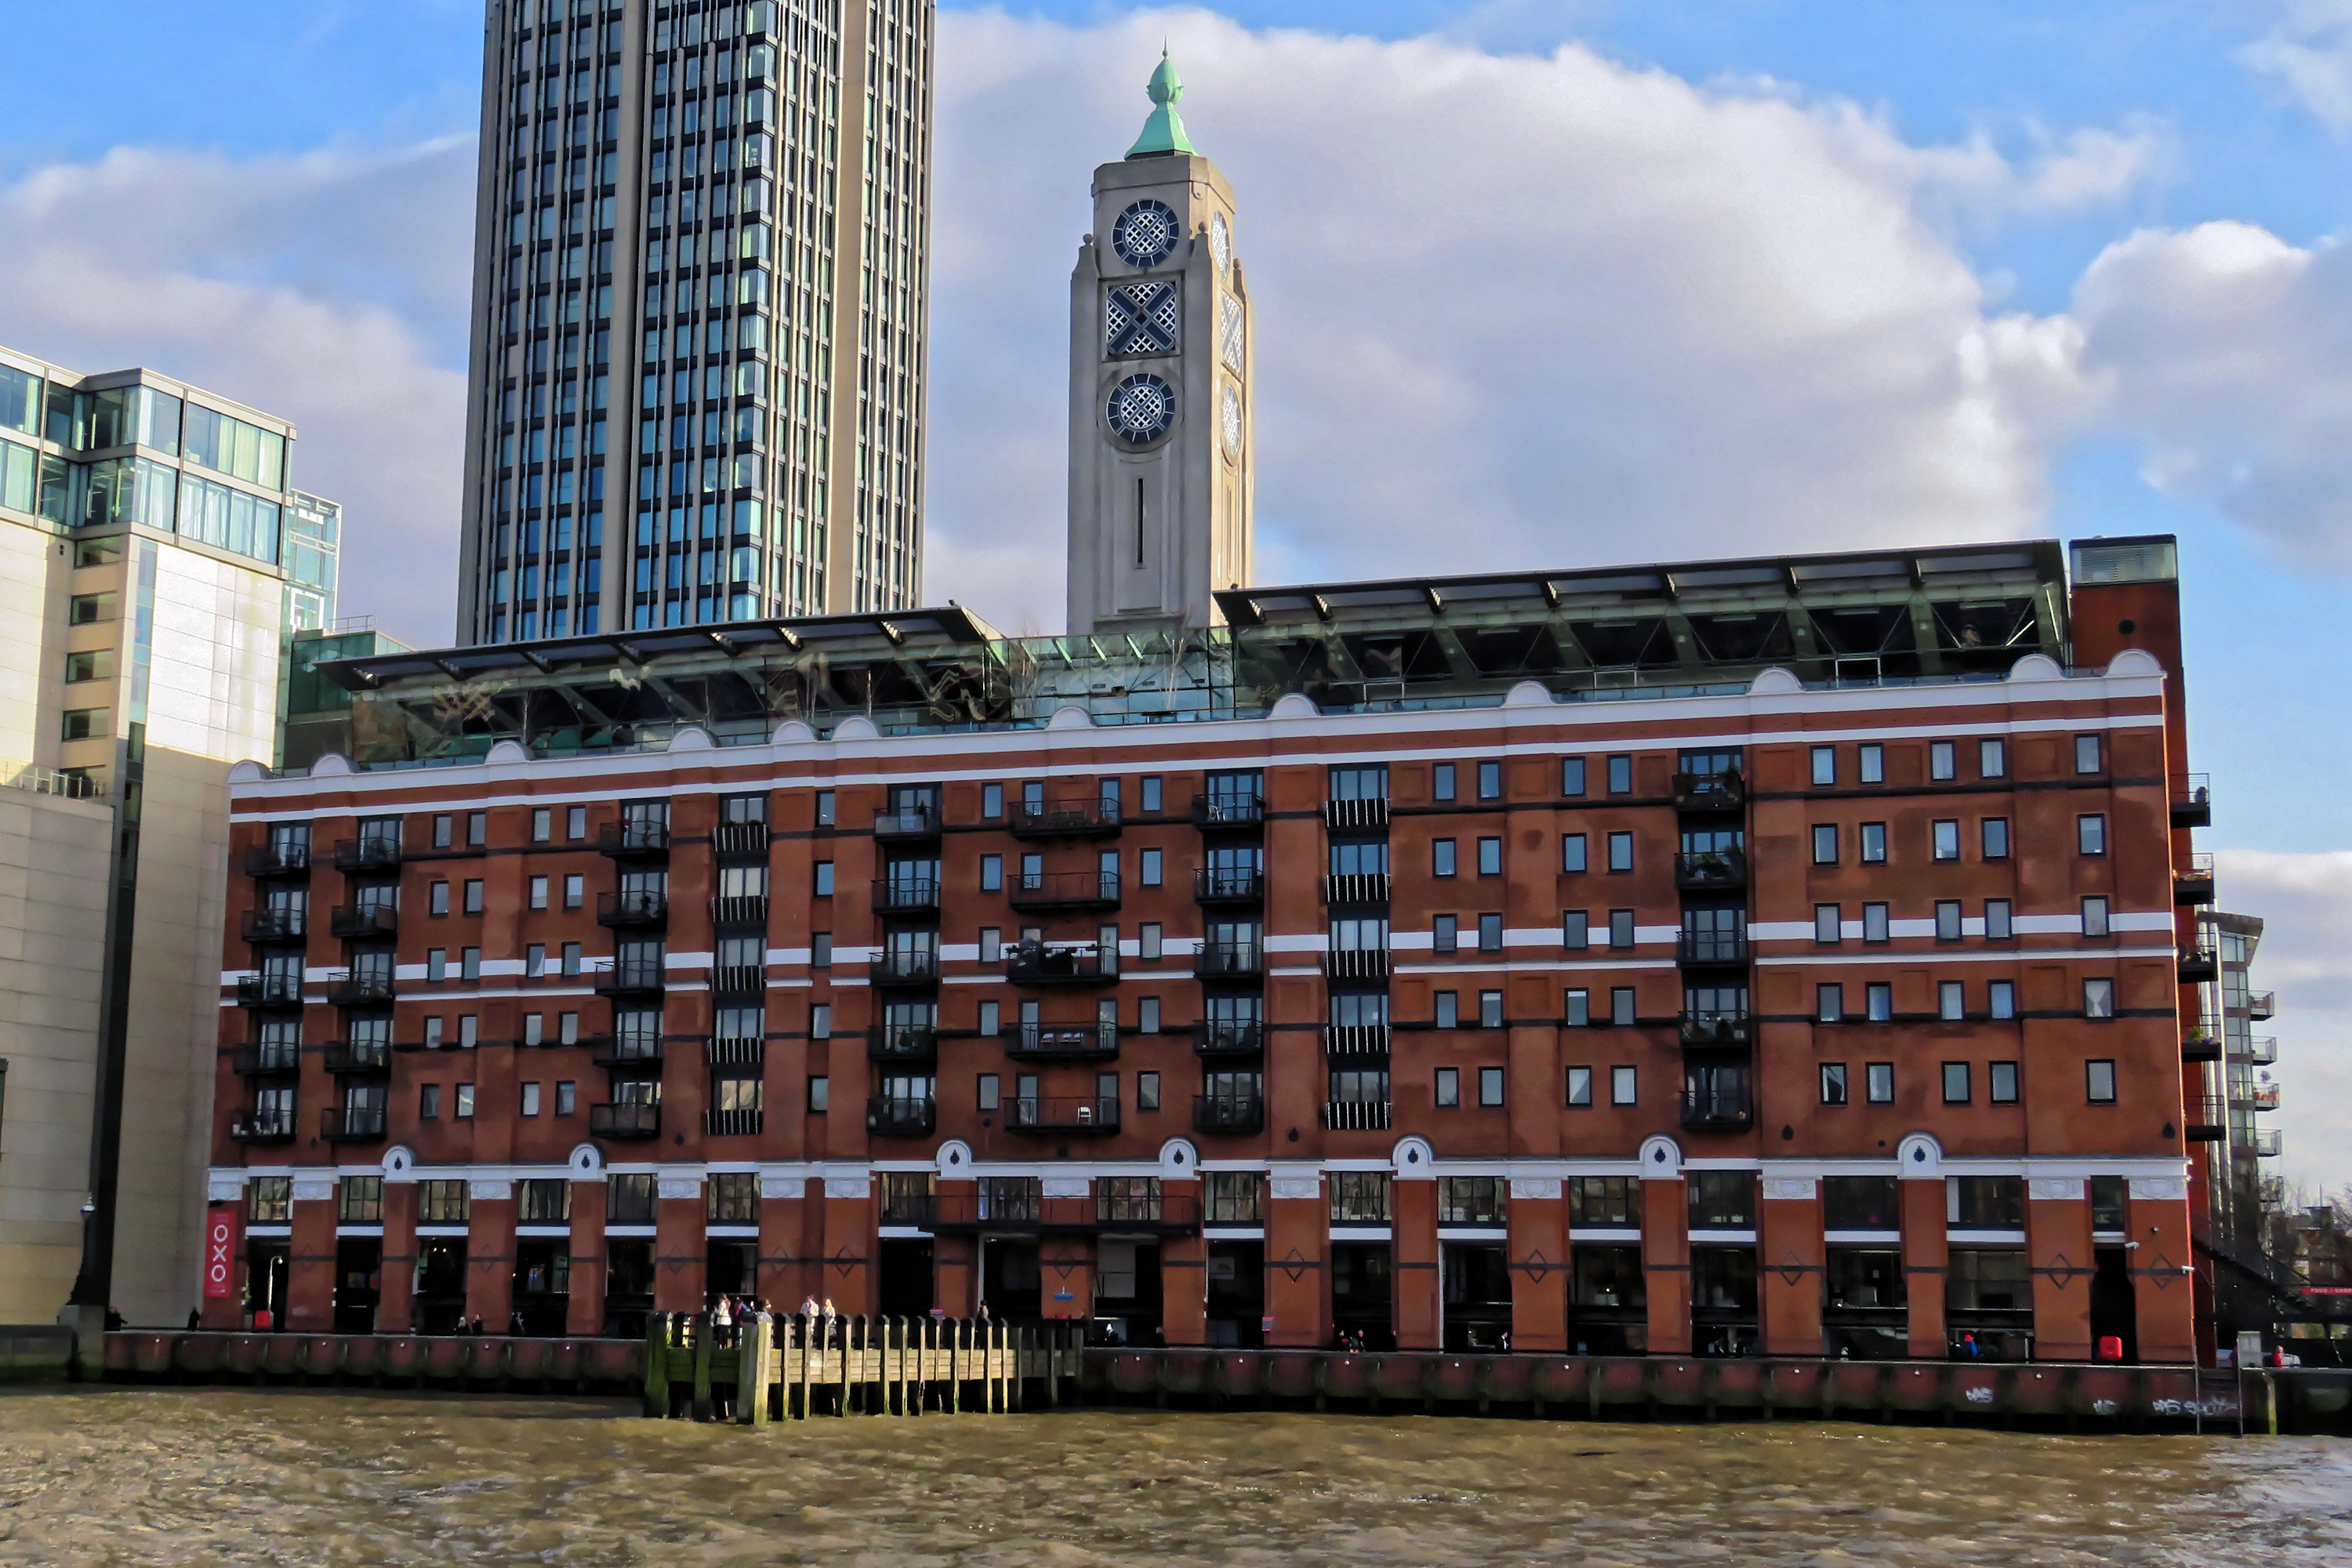 OXO Tower